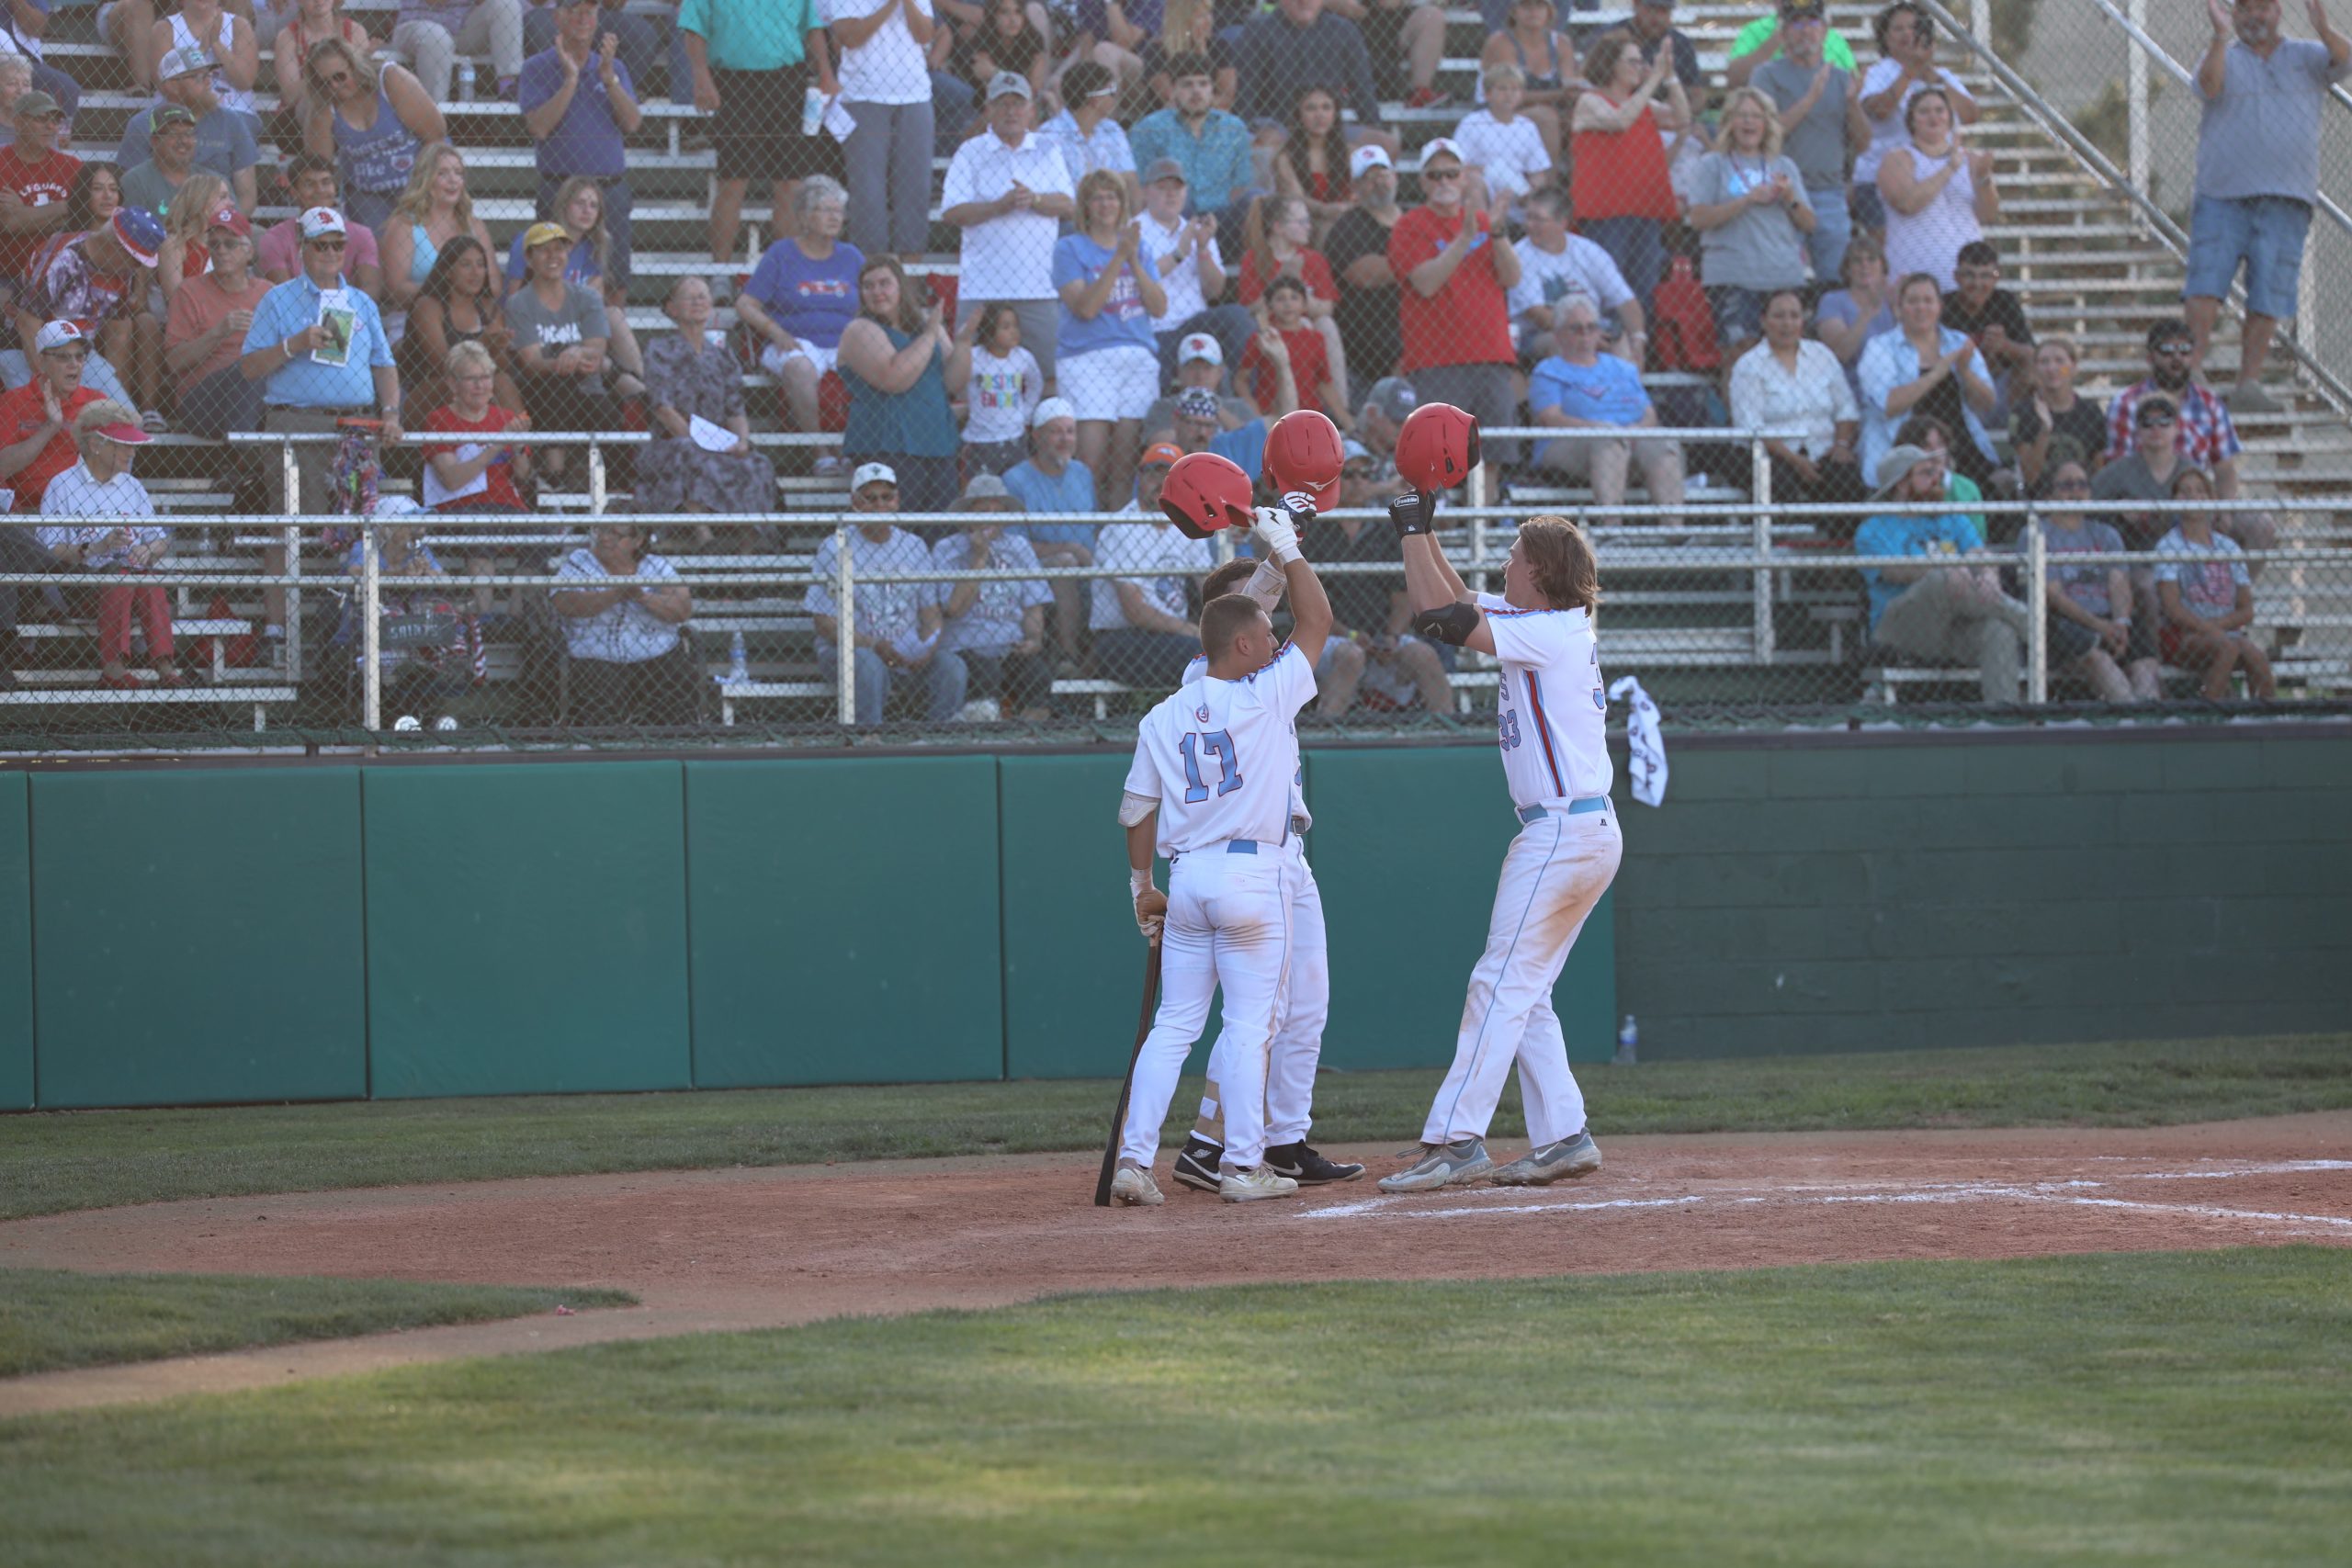 Three Home Runs in the Third on the 4th for Bee Jays